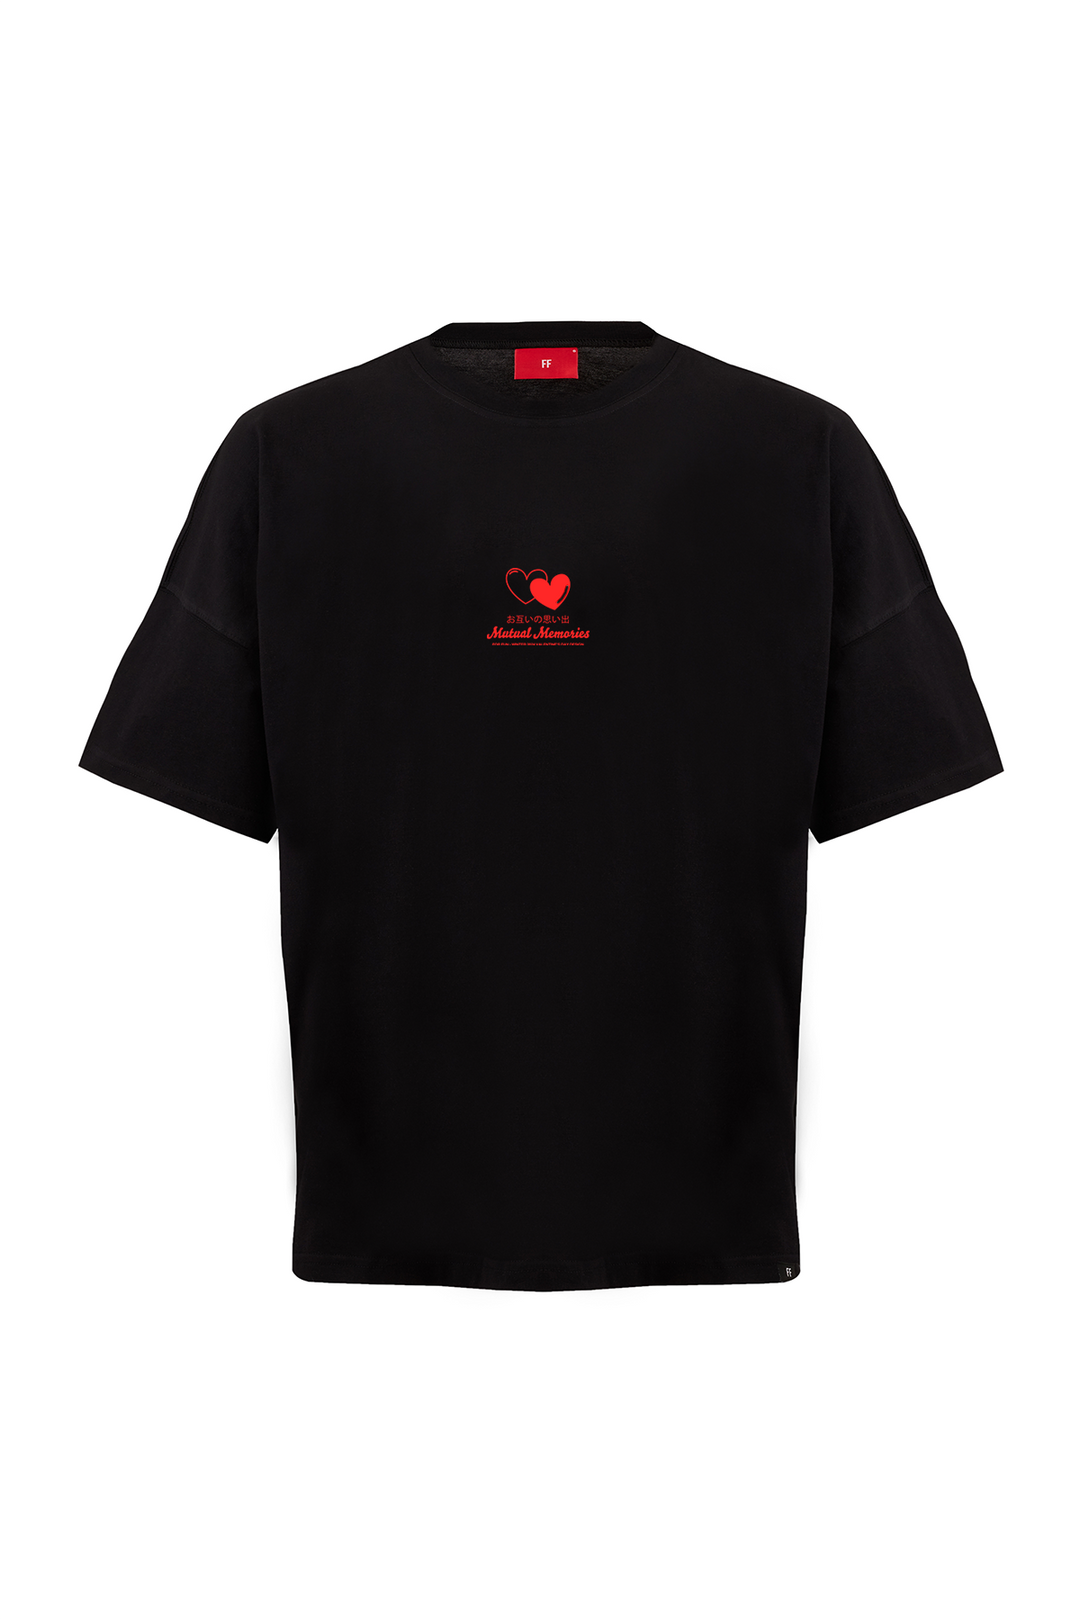 Mutual Memories - February 14th Valentine's Day / Drop Shoulder Oversize T-shirt